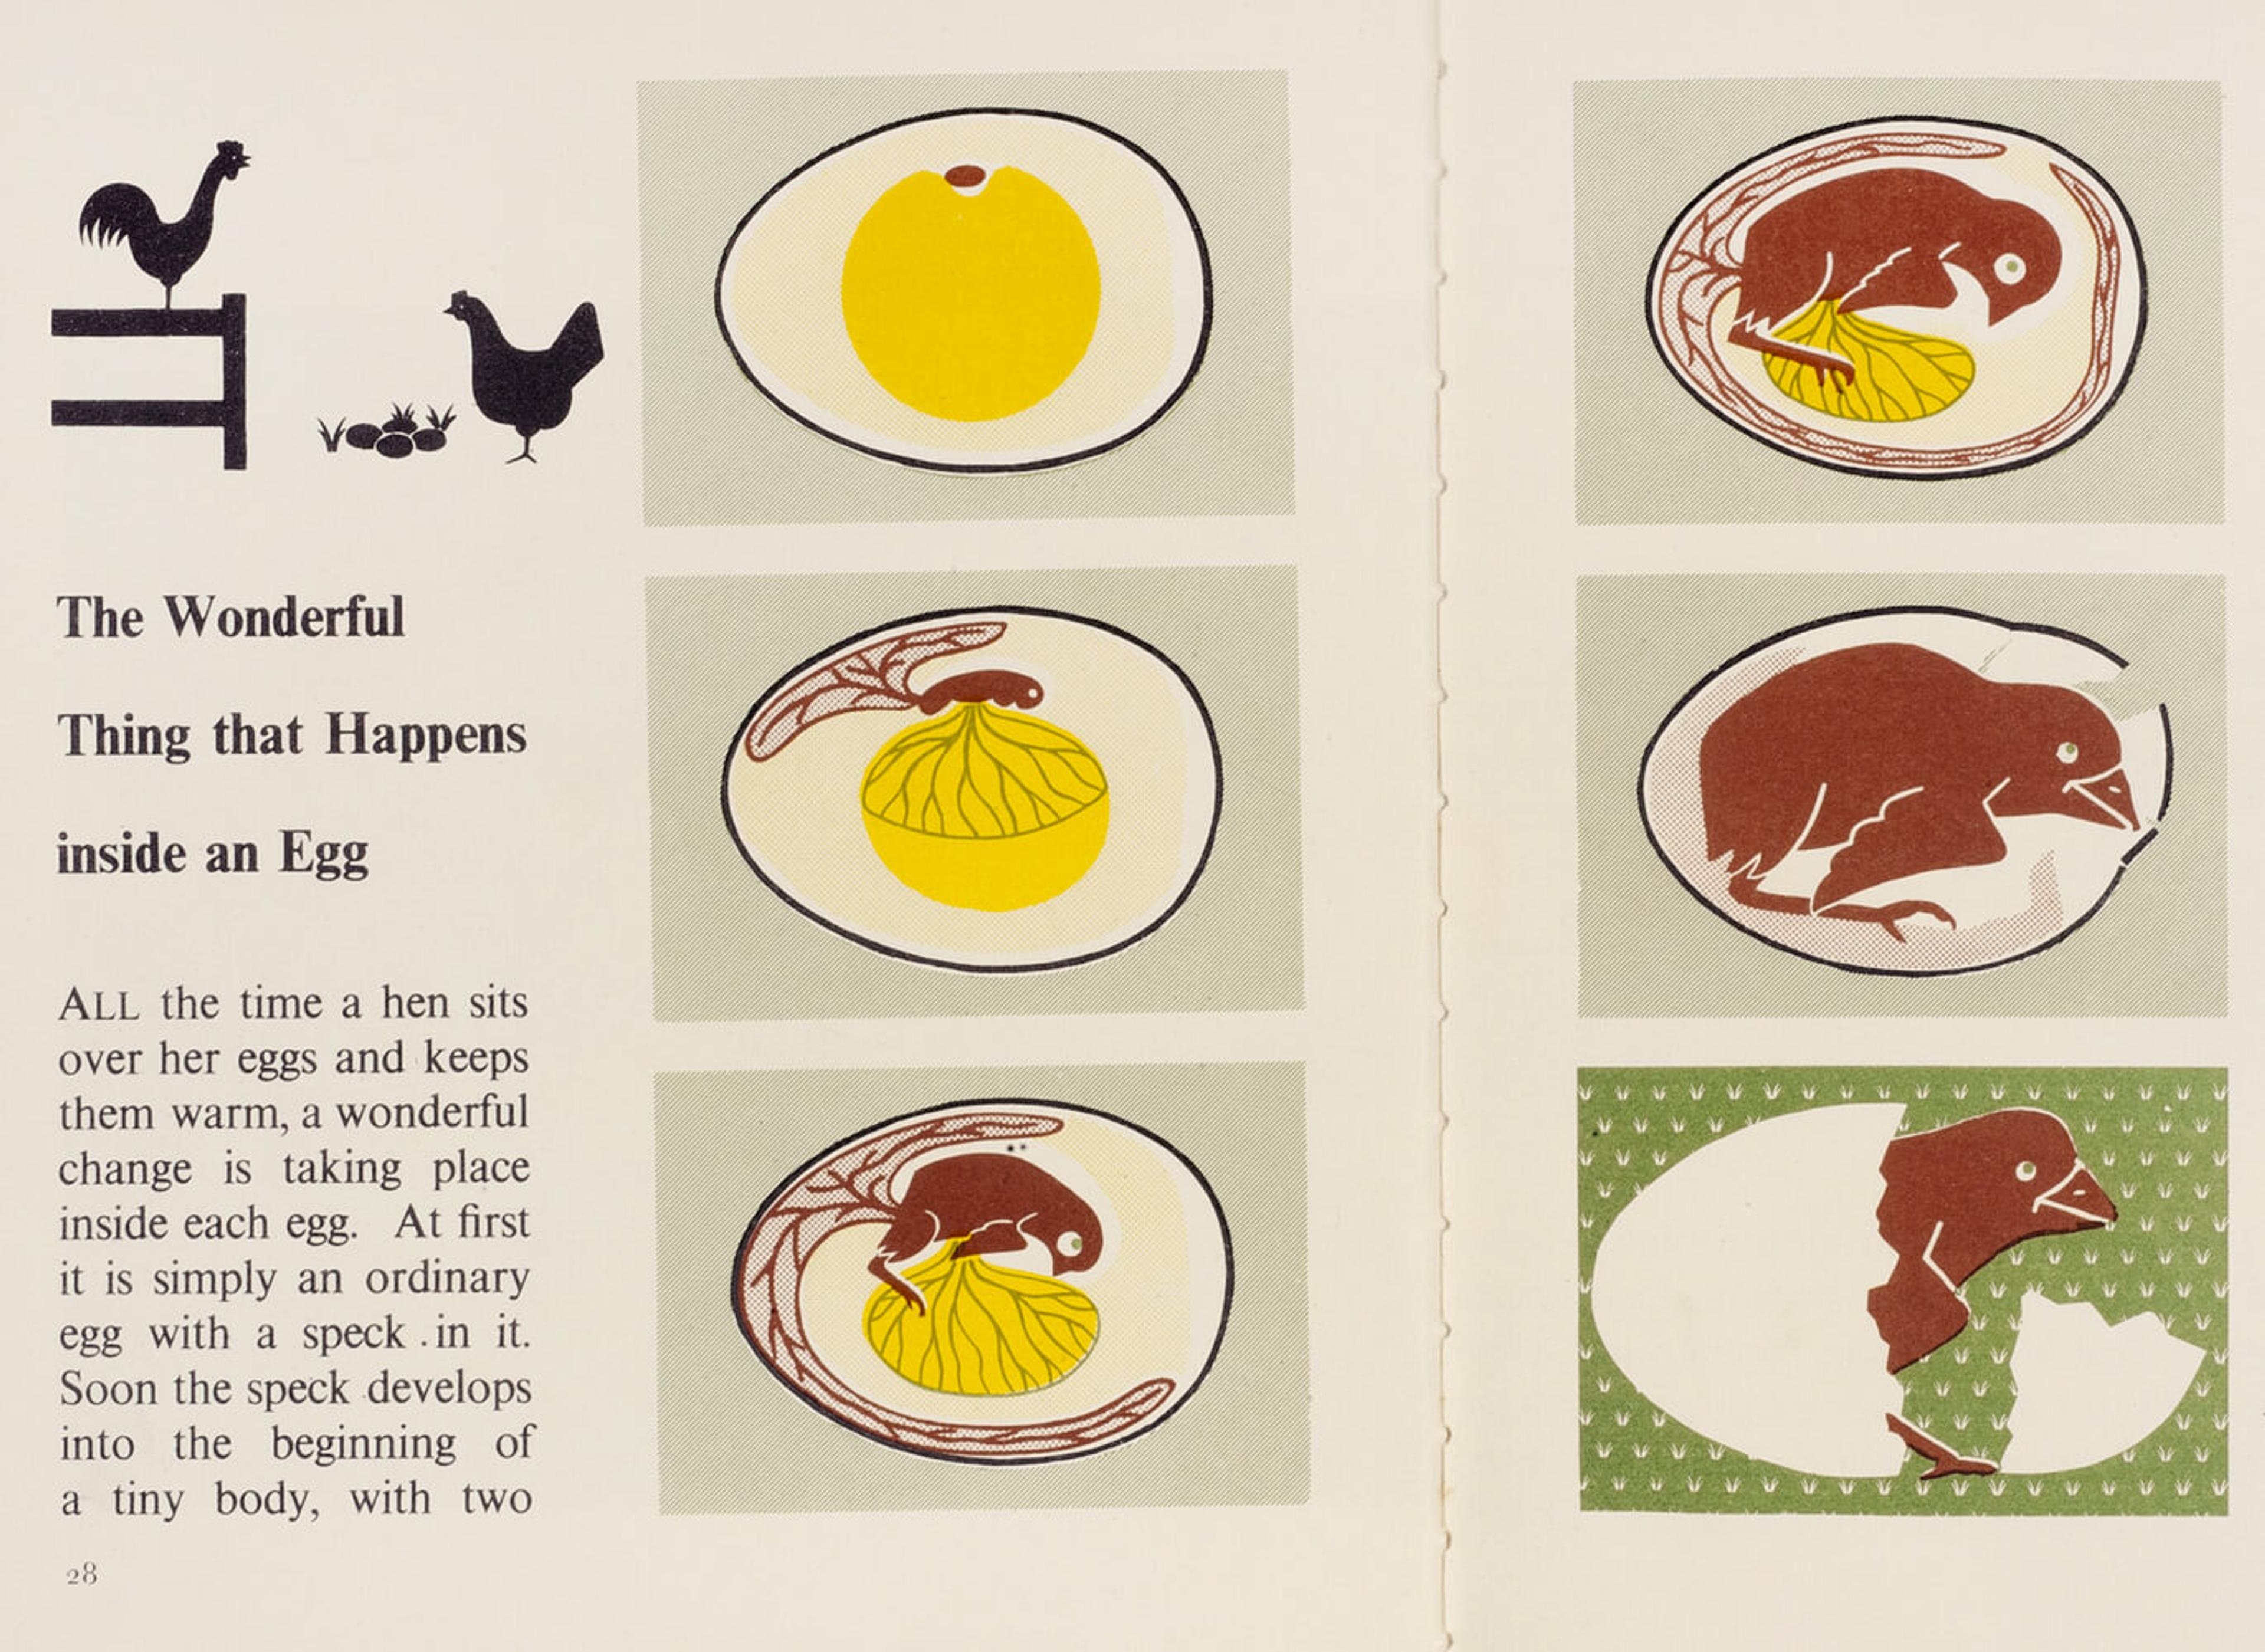 Sequential illustration spread illustrating how a chick develops inside an egg